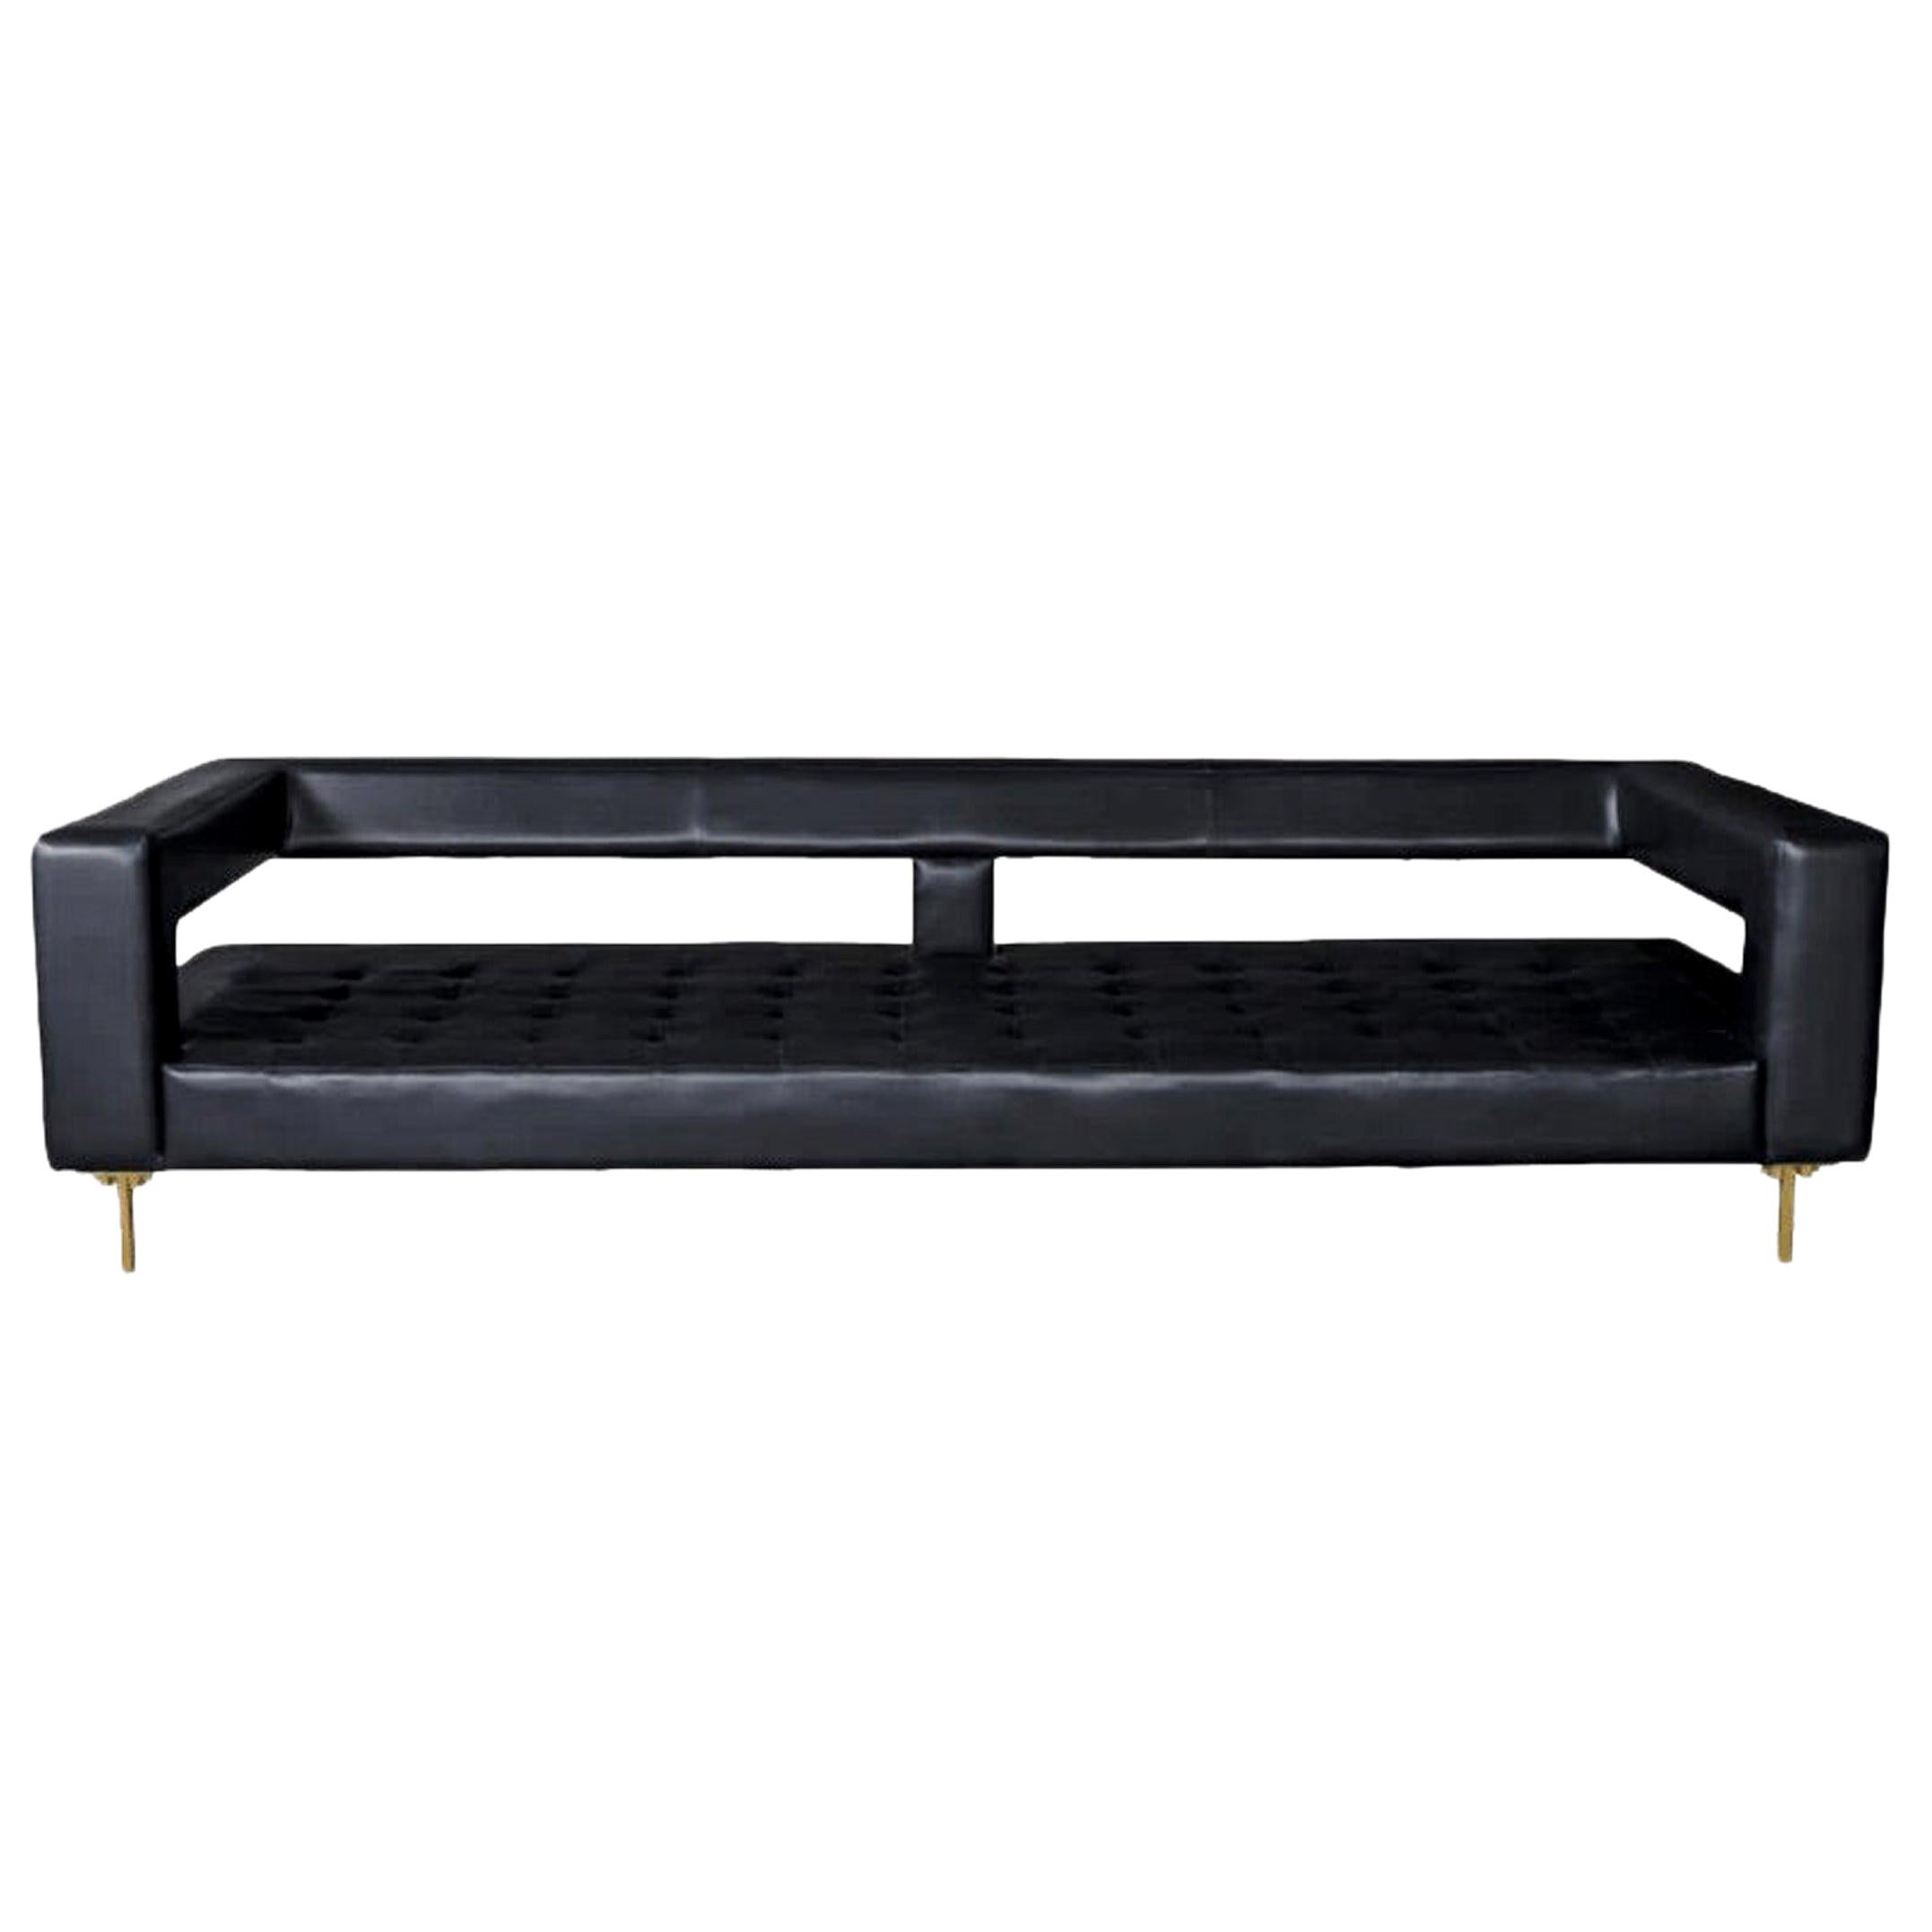 Air Blue Leather Tufted Sofa with Brass Legs by ATRA For Sale